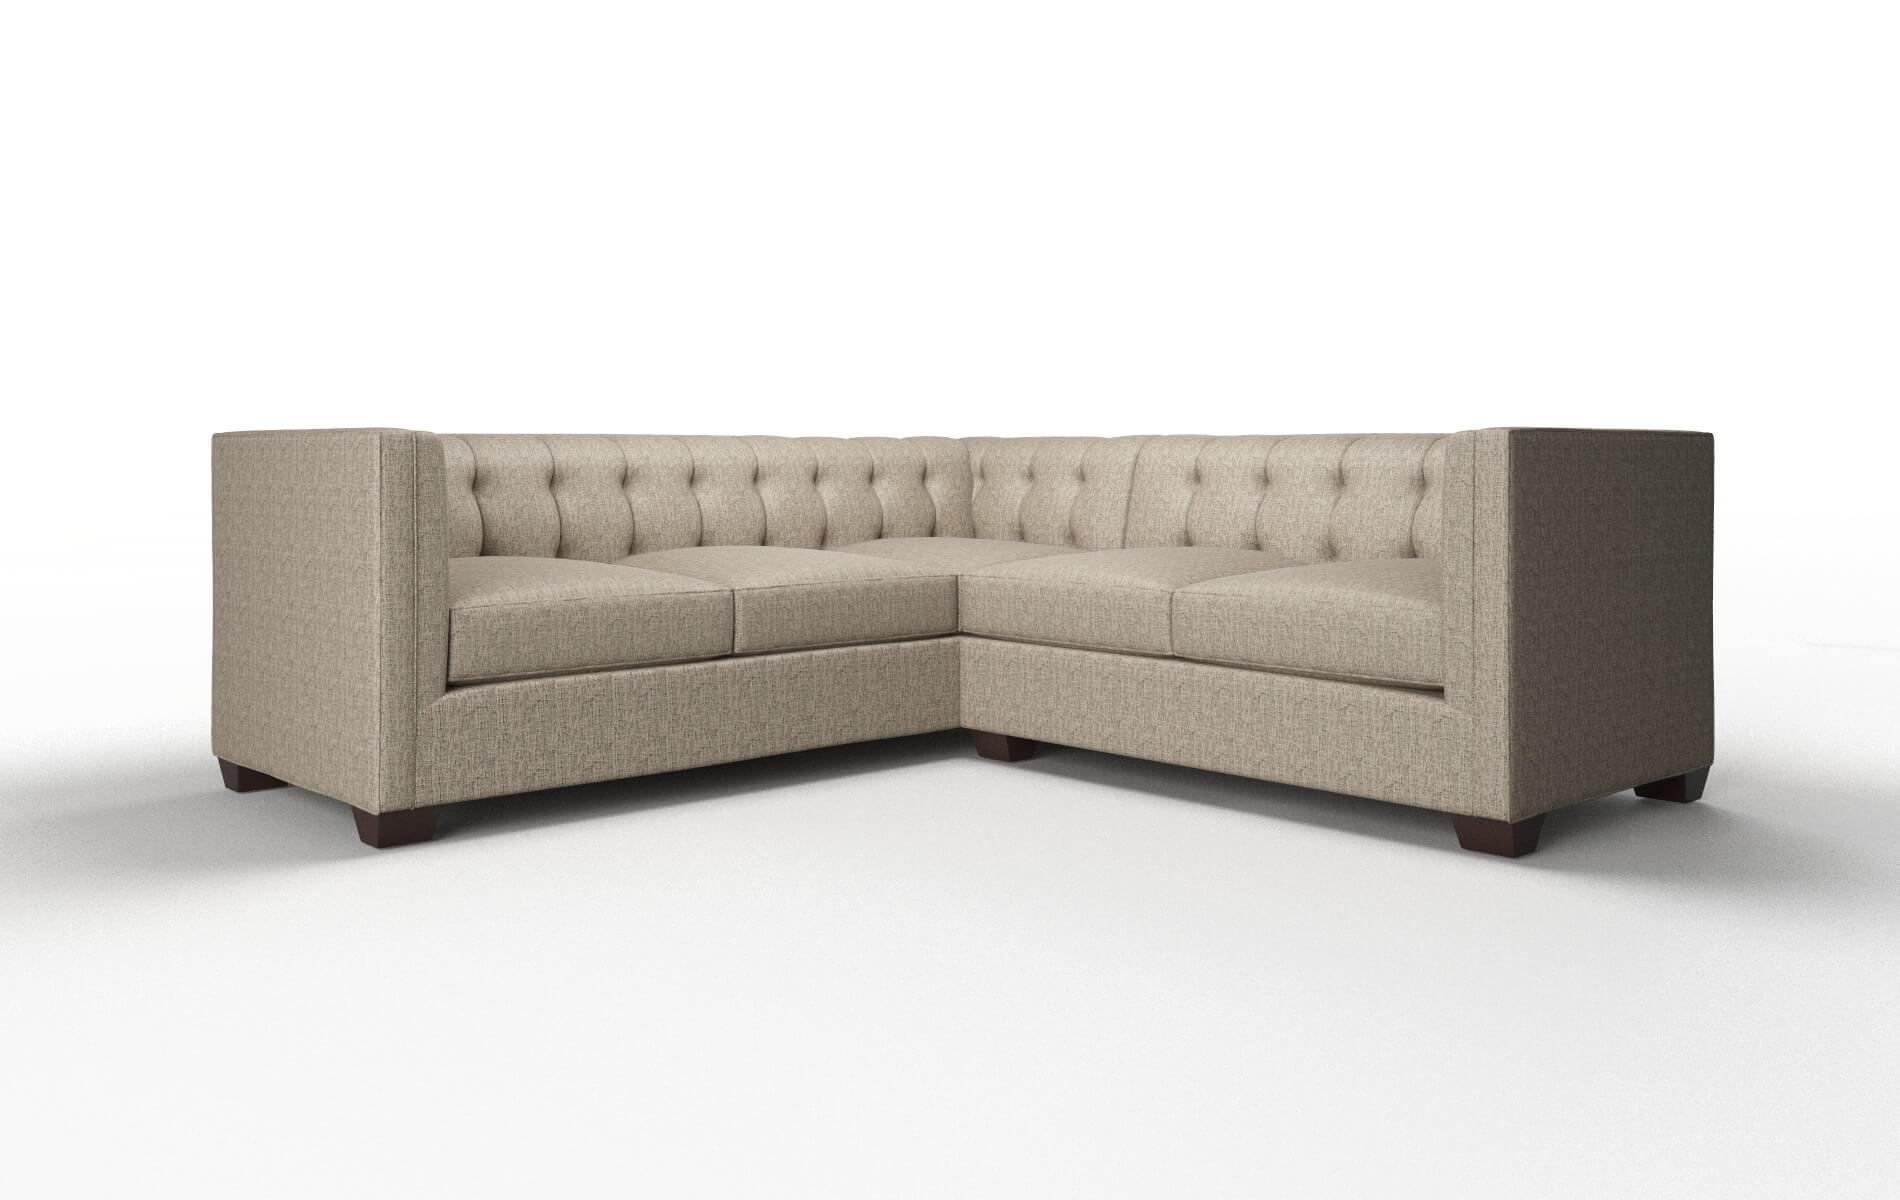 Grant Solifestyle 51 Sectional espresso legs